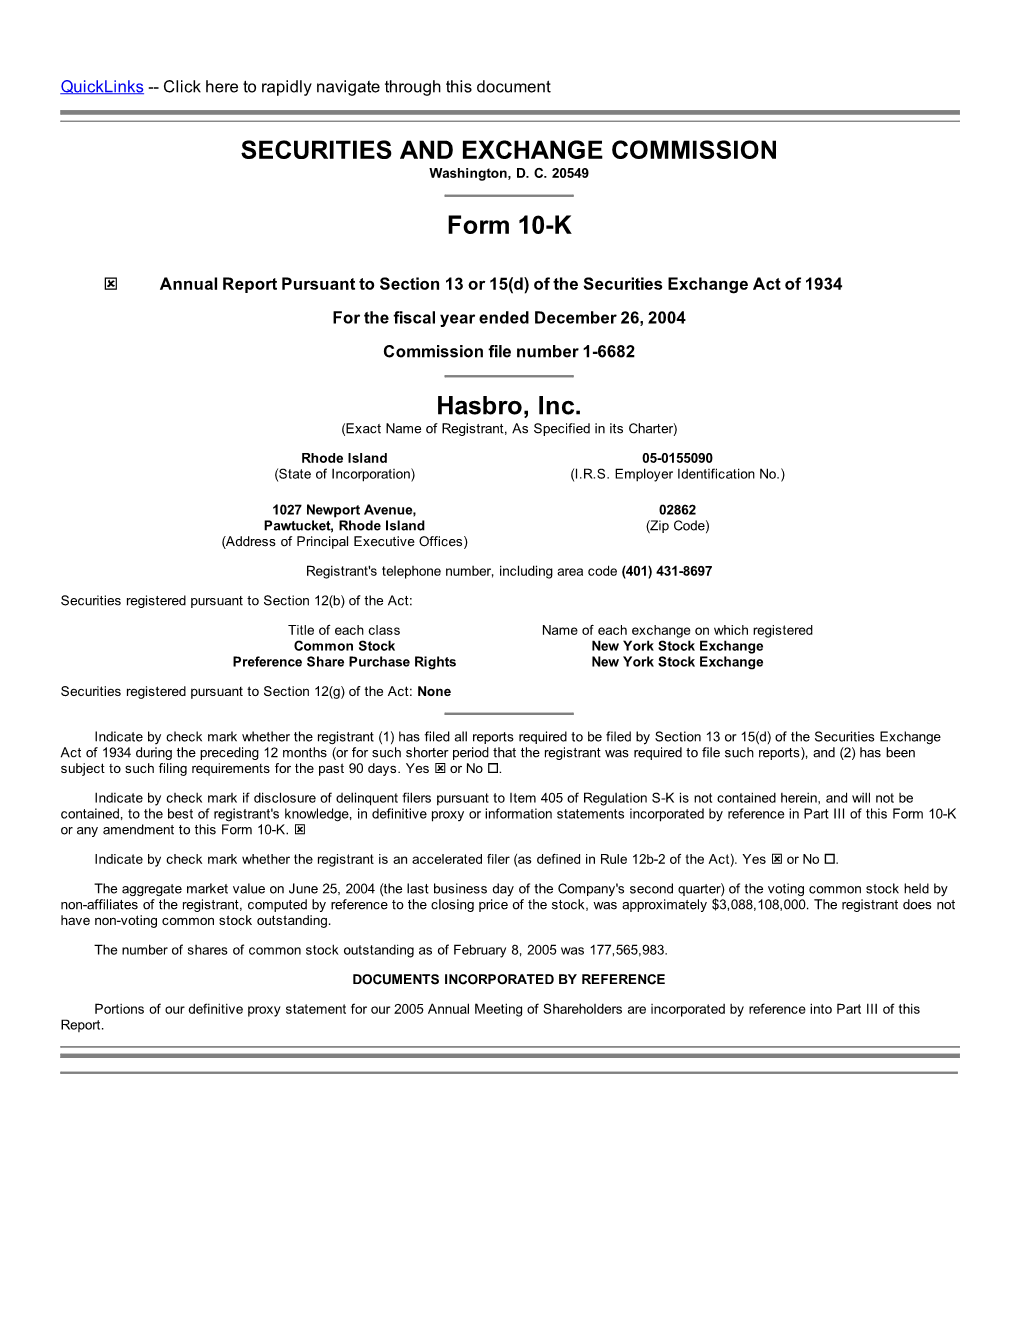 SECURITIES and EXCHANGE COMMISSION Form 10-K Hasbro, Inc